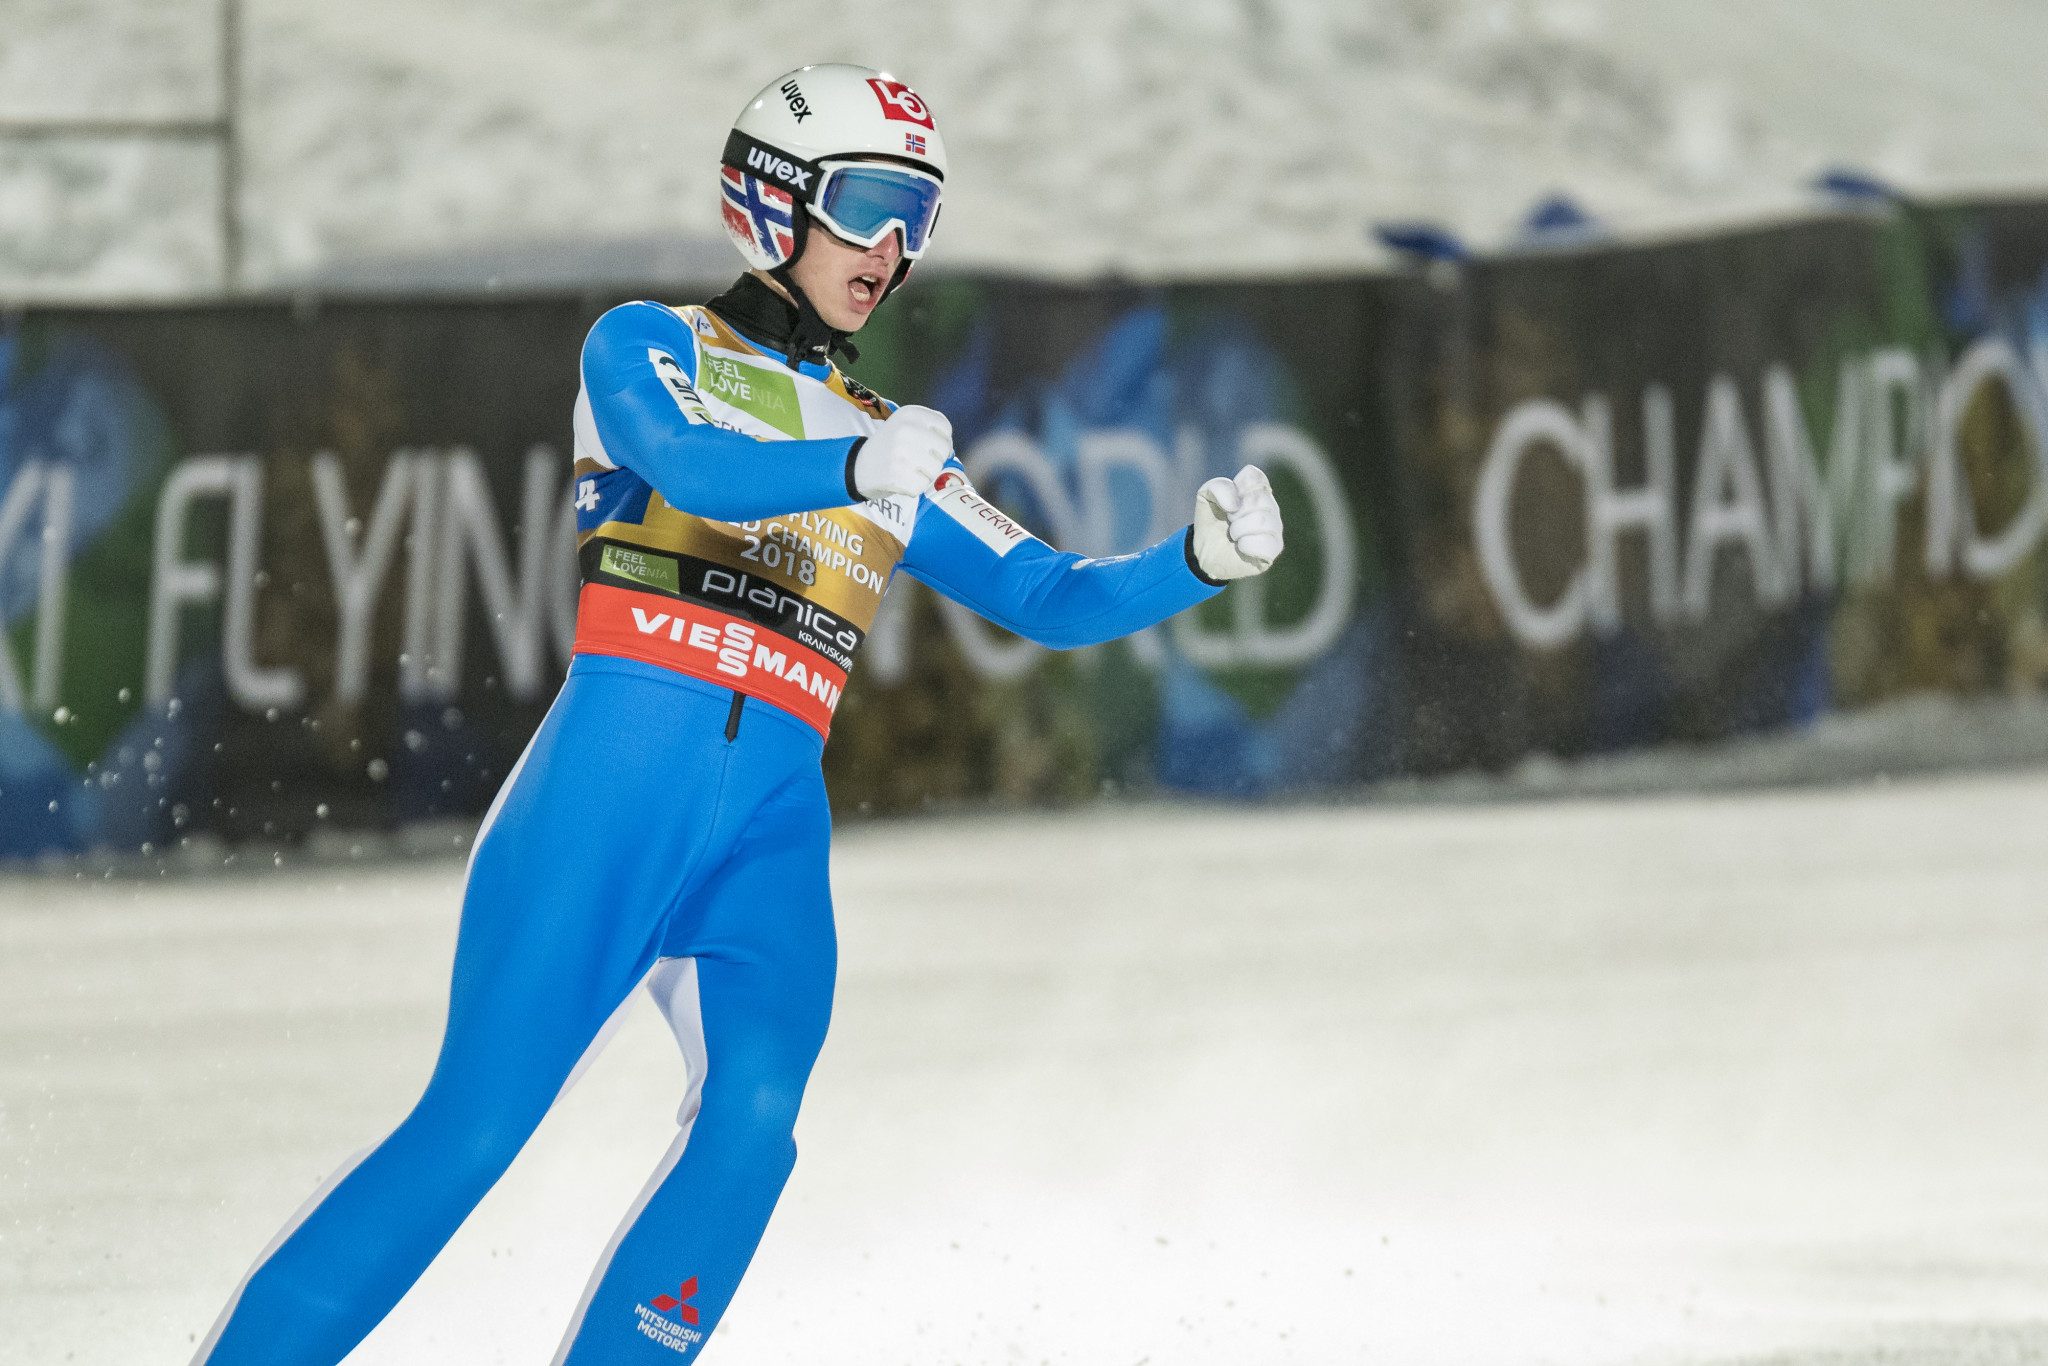 Granerud looking to continue winning run as Four Hills Tournament begins